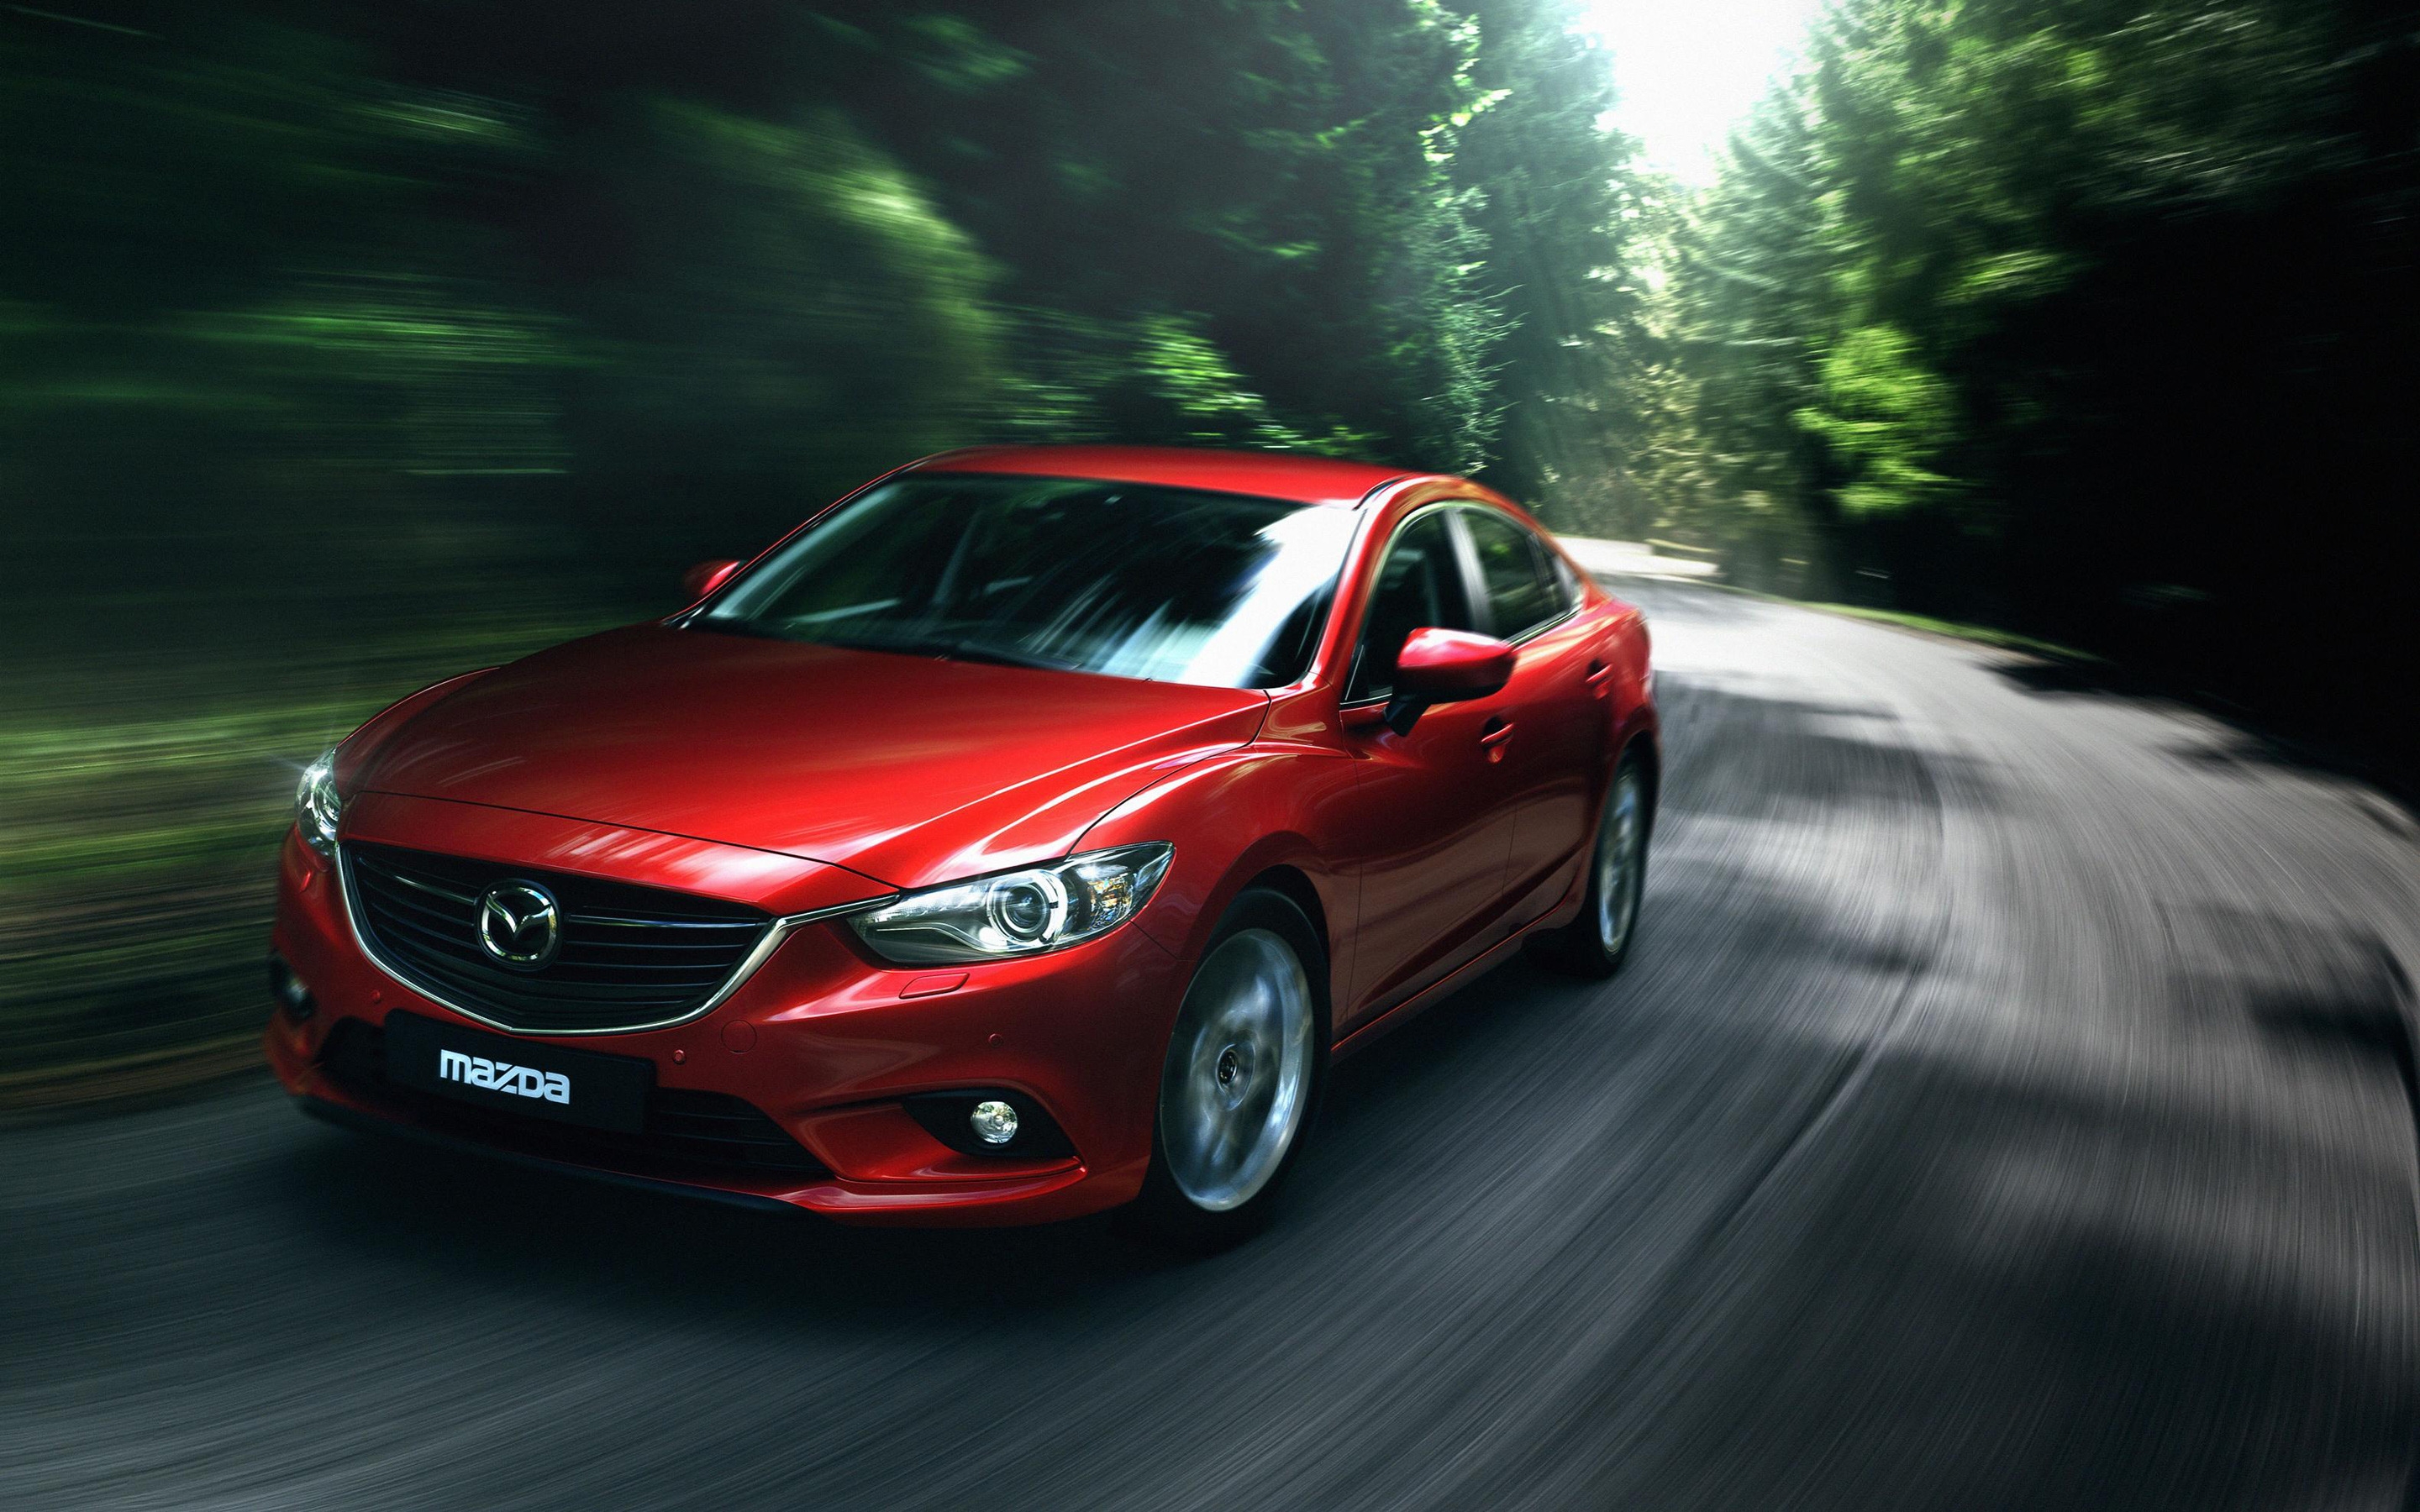 Gorgeous Red Mazda 6 for 2880 x 1800 Retina Display resolution